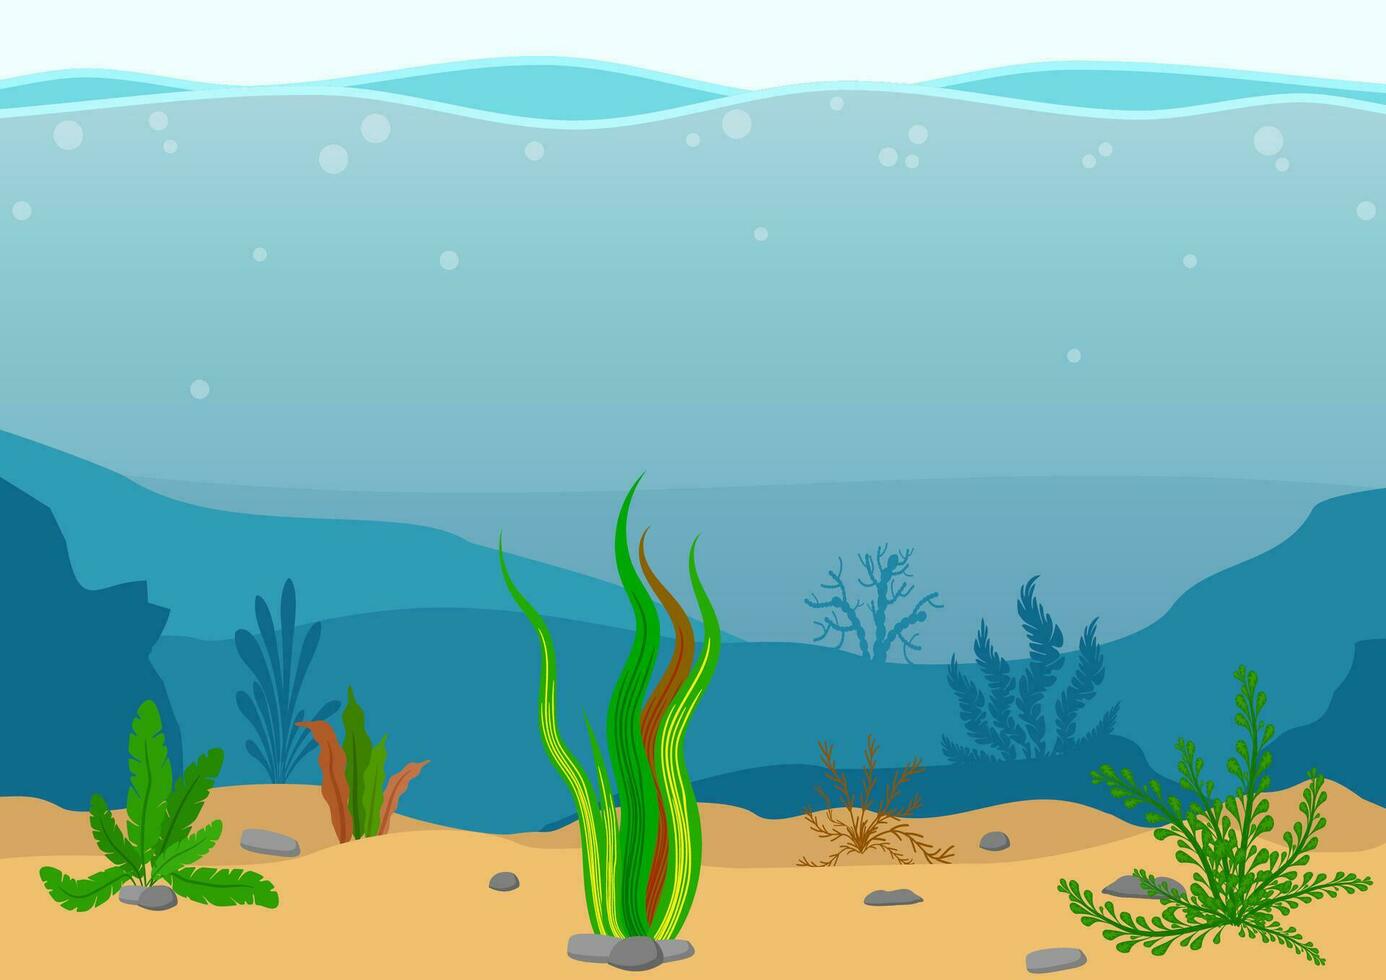 Underwater landscape with seaweeds. Seascape with reef. Marine sea bottom silhouette with seaweed. Nature Scene in flat cartoon style. Vector illustration